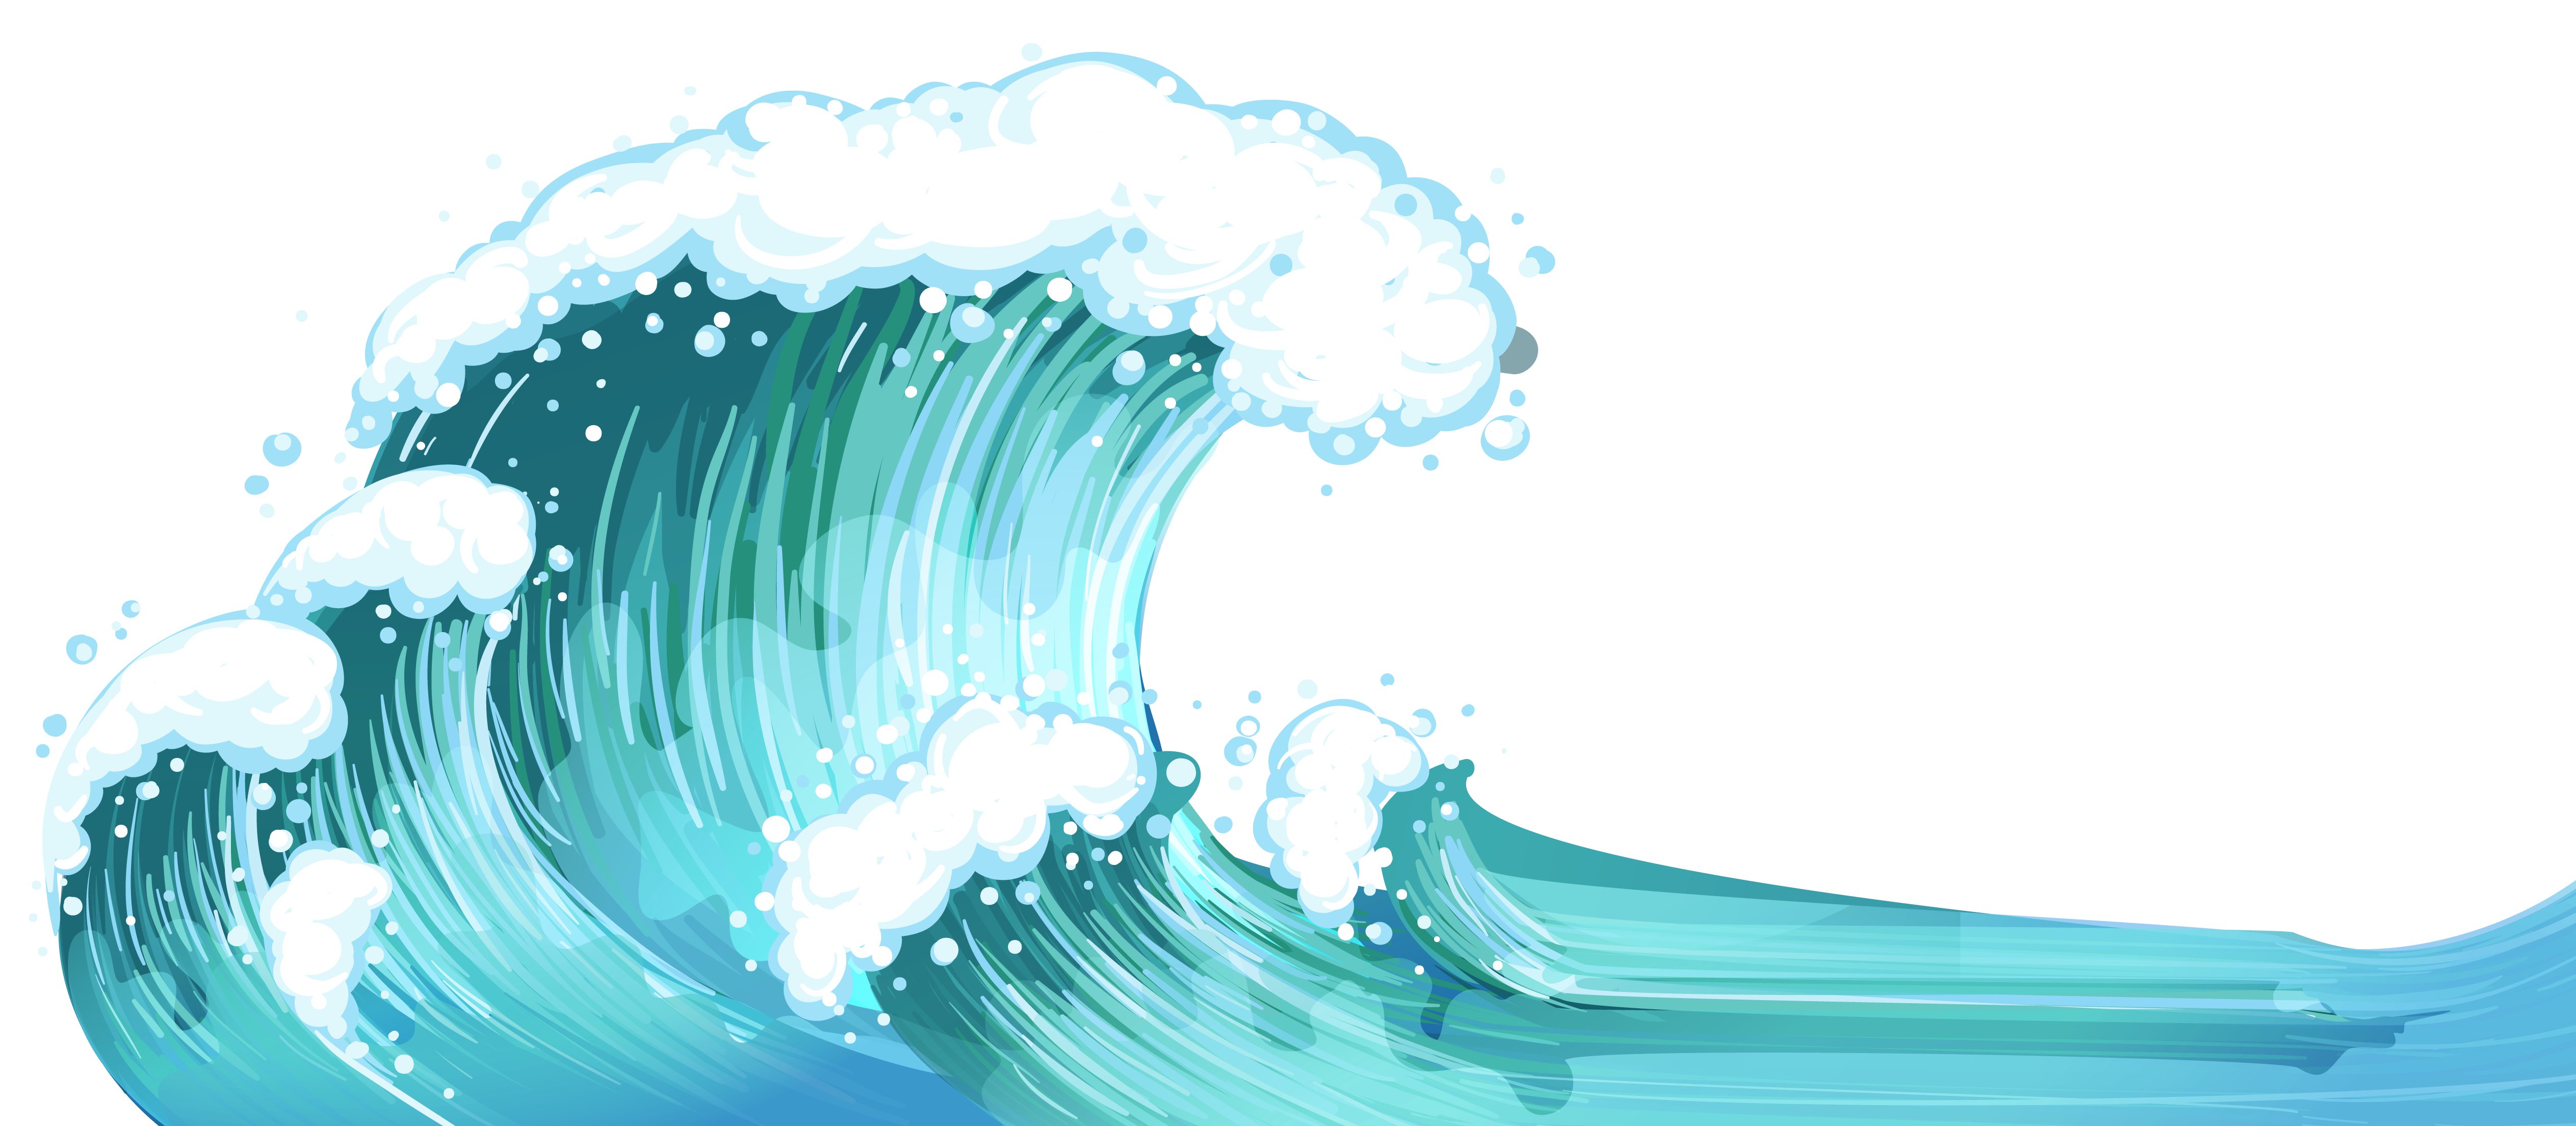 And Sea Light Waves Radiation Wave Propagation Clipart